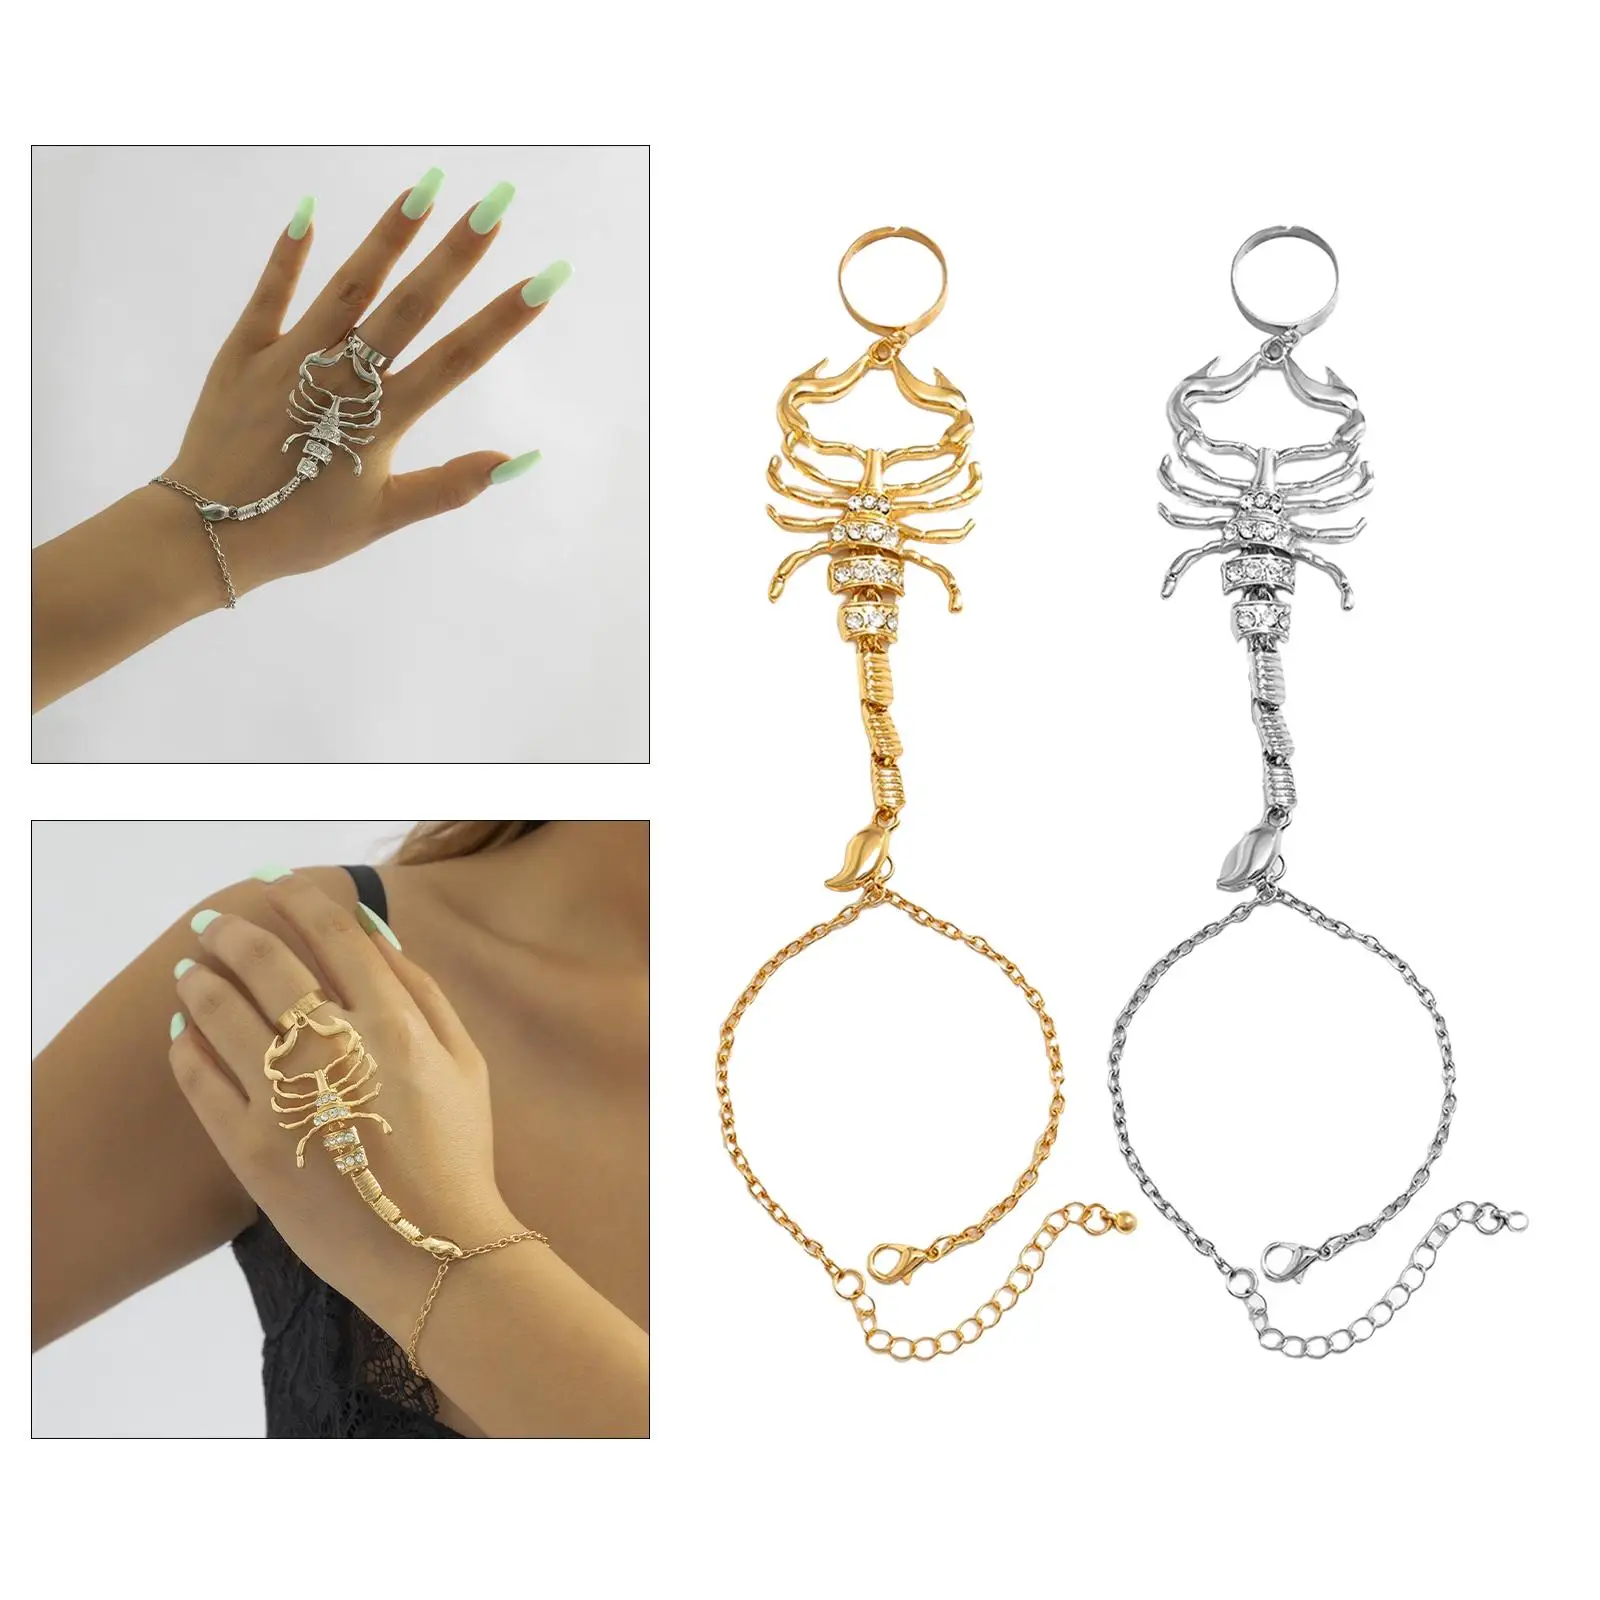 Scorpion Finger Ring Hand Chain Rock Hip Hop Fashion Hand Harness Gothic One Size Gifts Bracelet Jewelry for Teens Women Girls